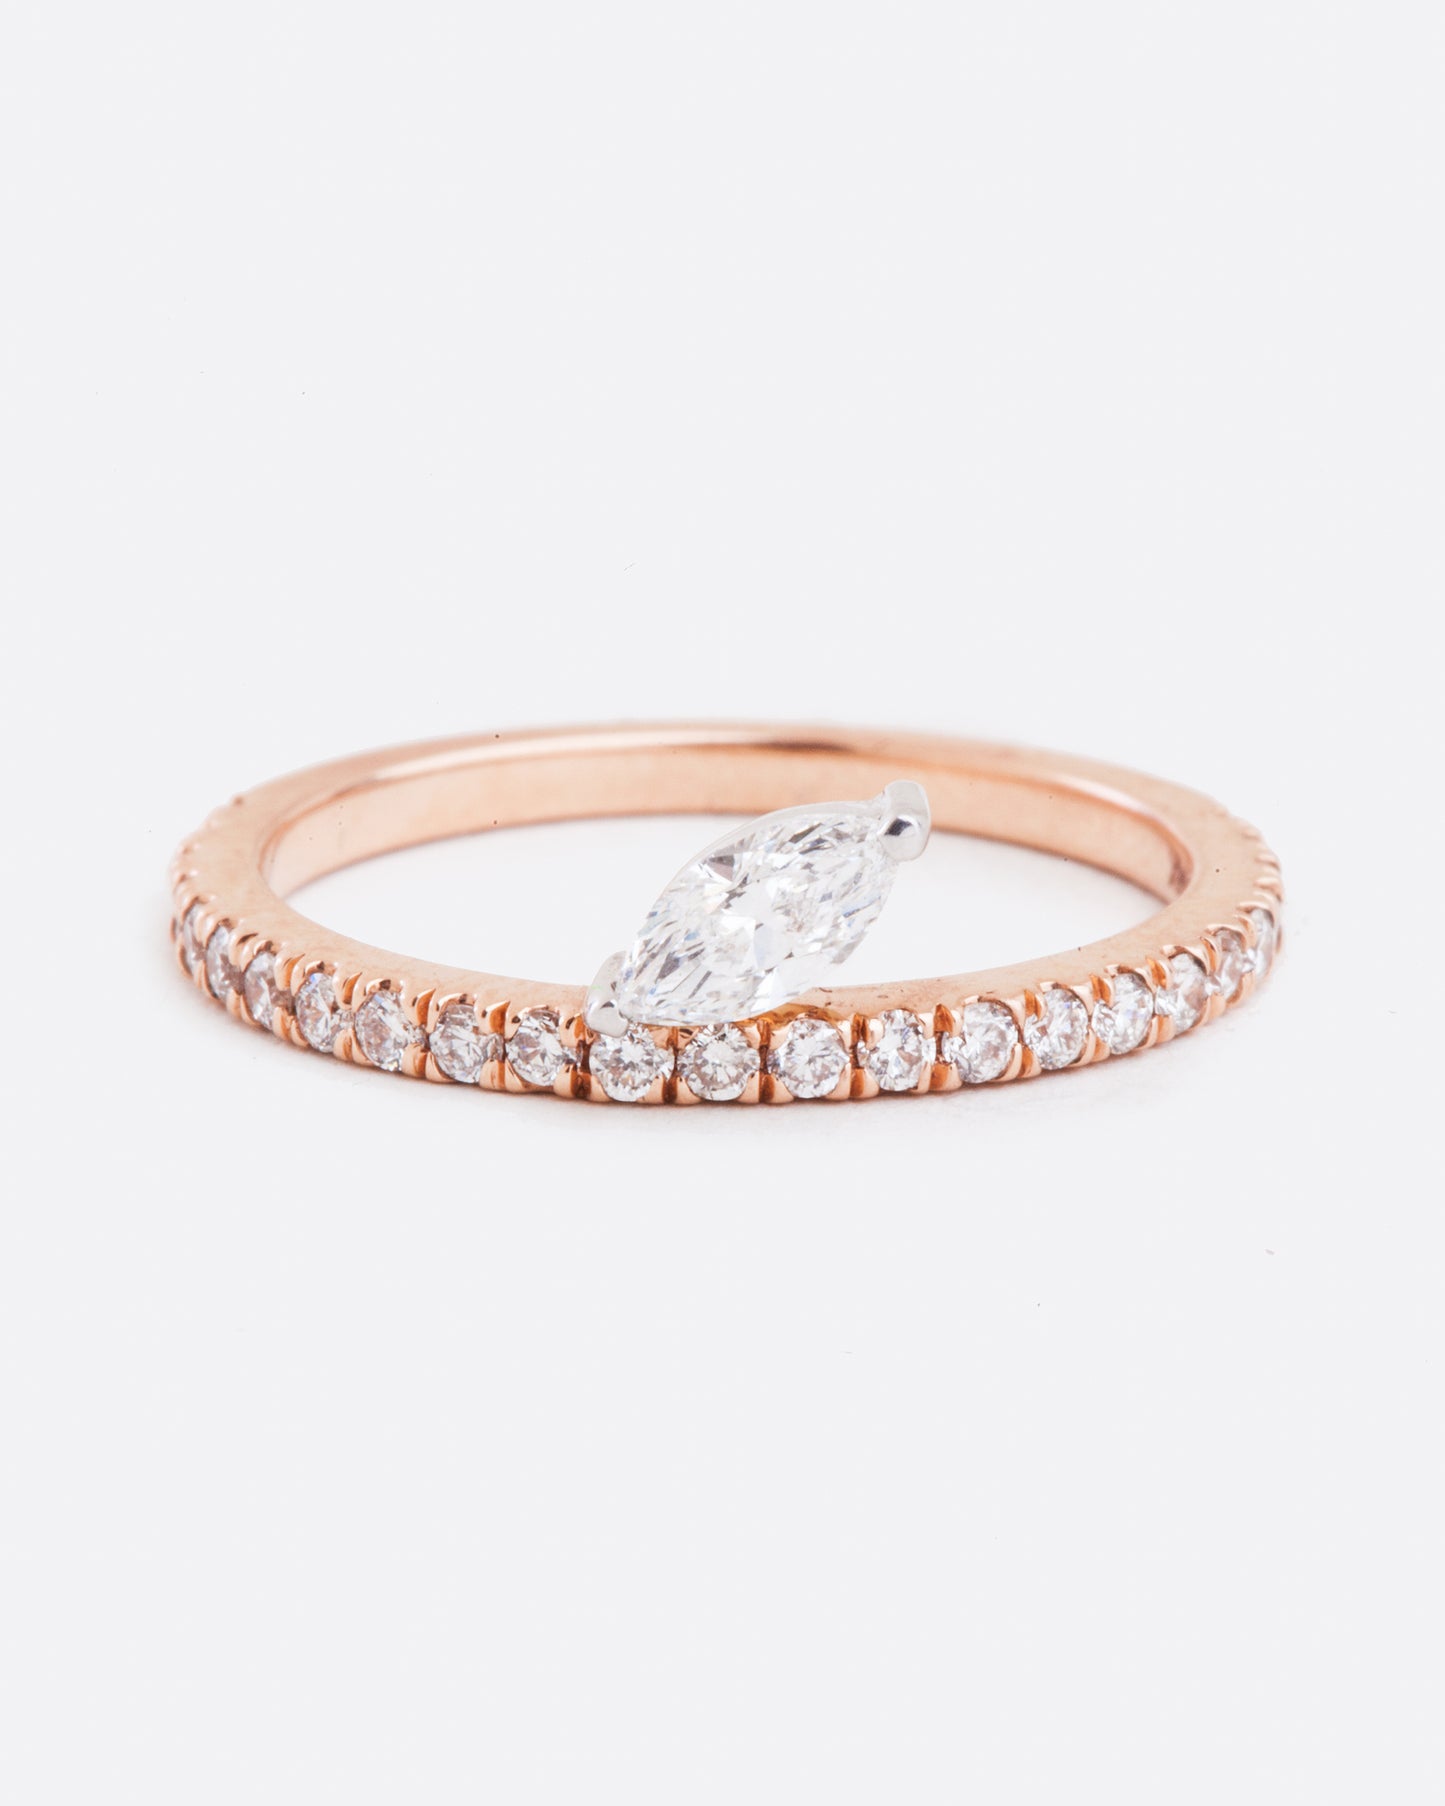 Front view of a marquise diamond sitting on a pave diamond rose gold band. The diamonds wrap 3/4 way around the ring.